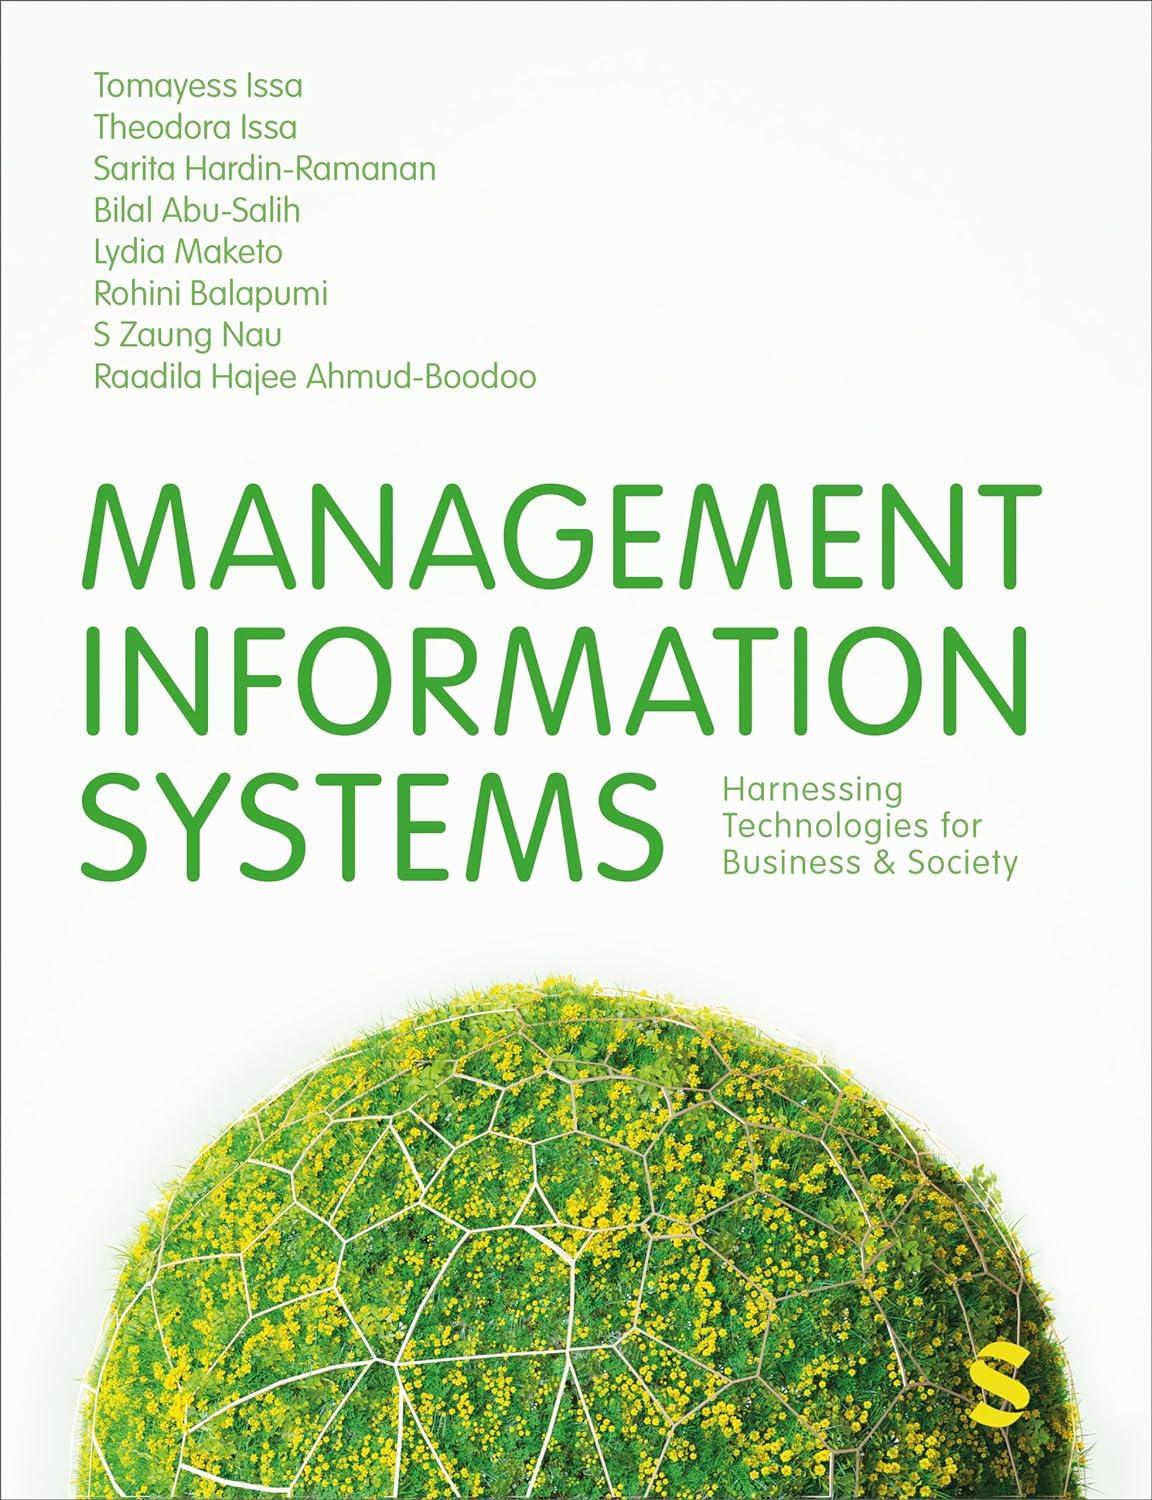 management information systems harnessing technologies for business and society 1st edition tomayess issa,